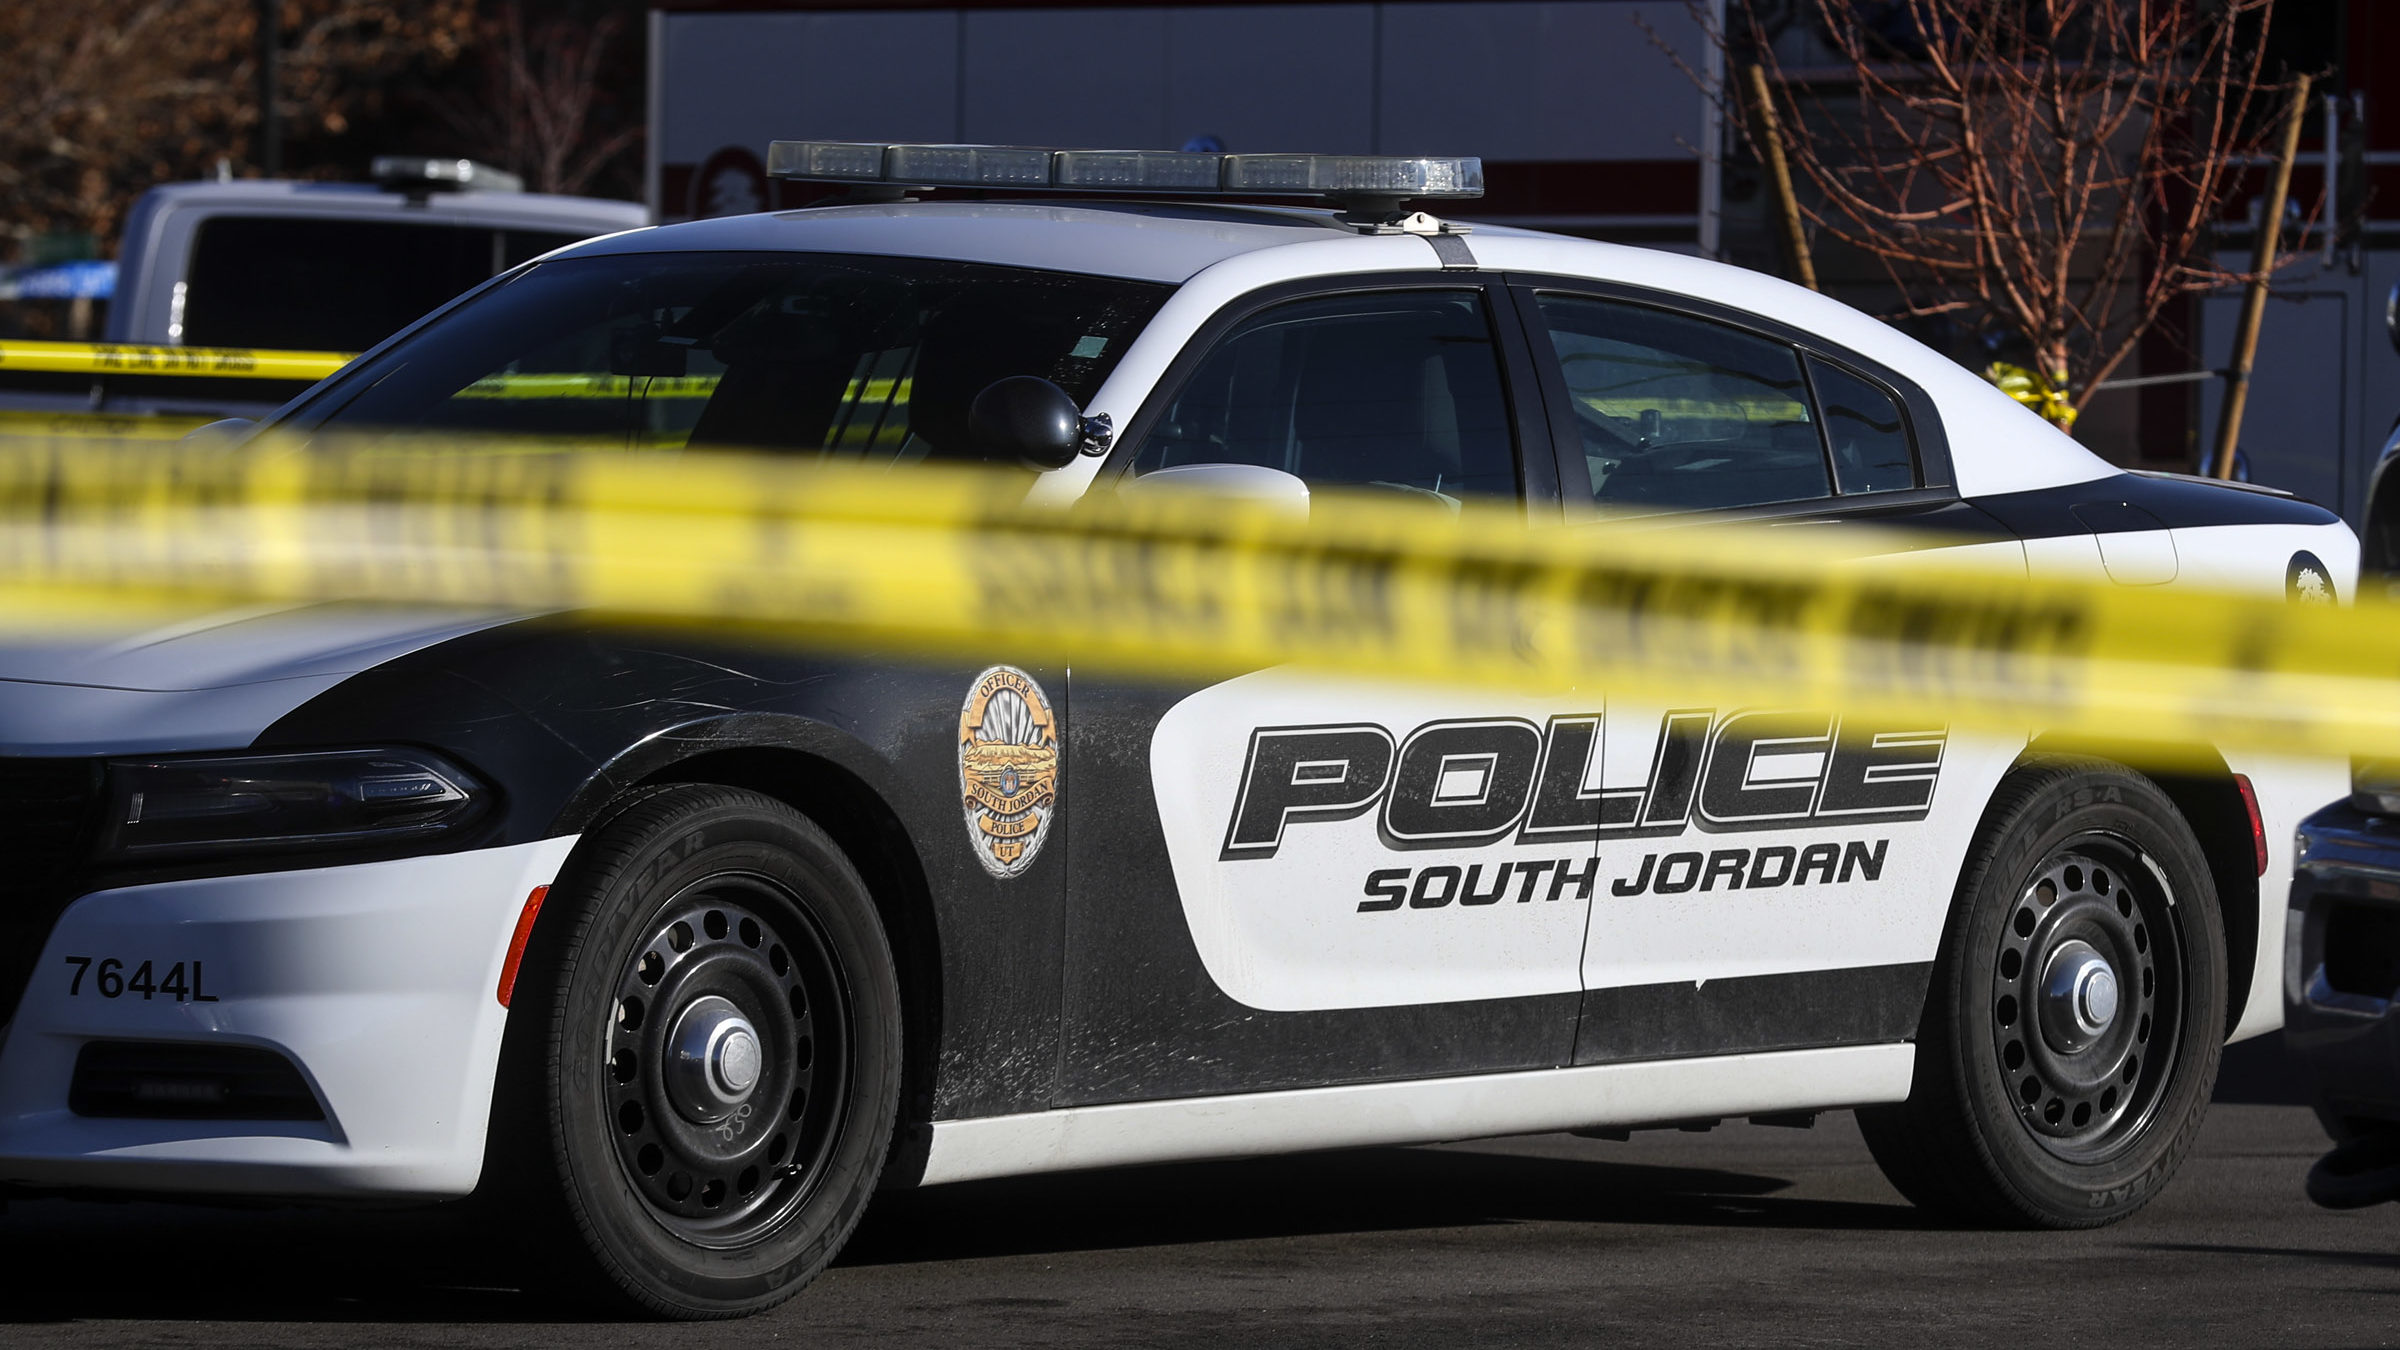 South Jordan police cars pictured., a construction worker died after a fall in south jordan...